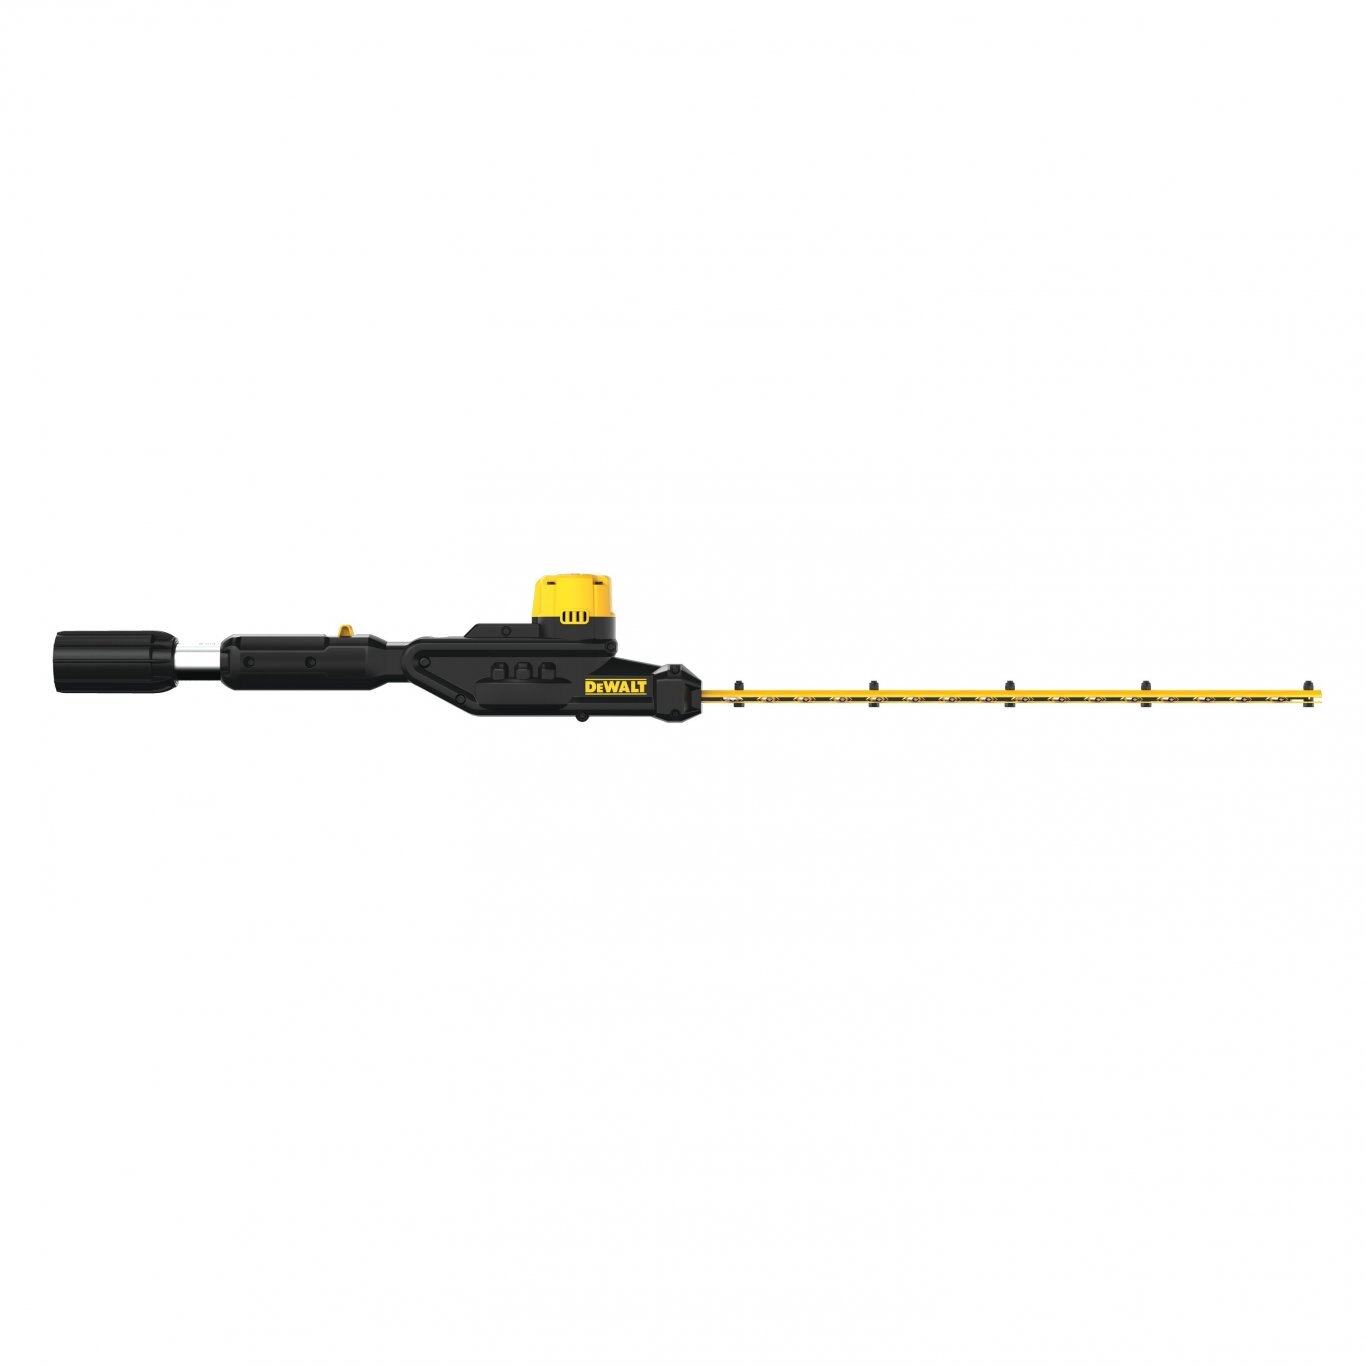 Dewalt Pole Hedge Trimmer Head with 20V MAX* Compatibility